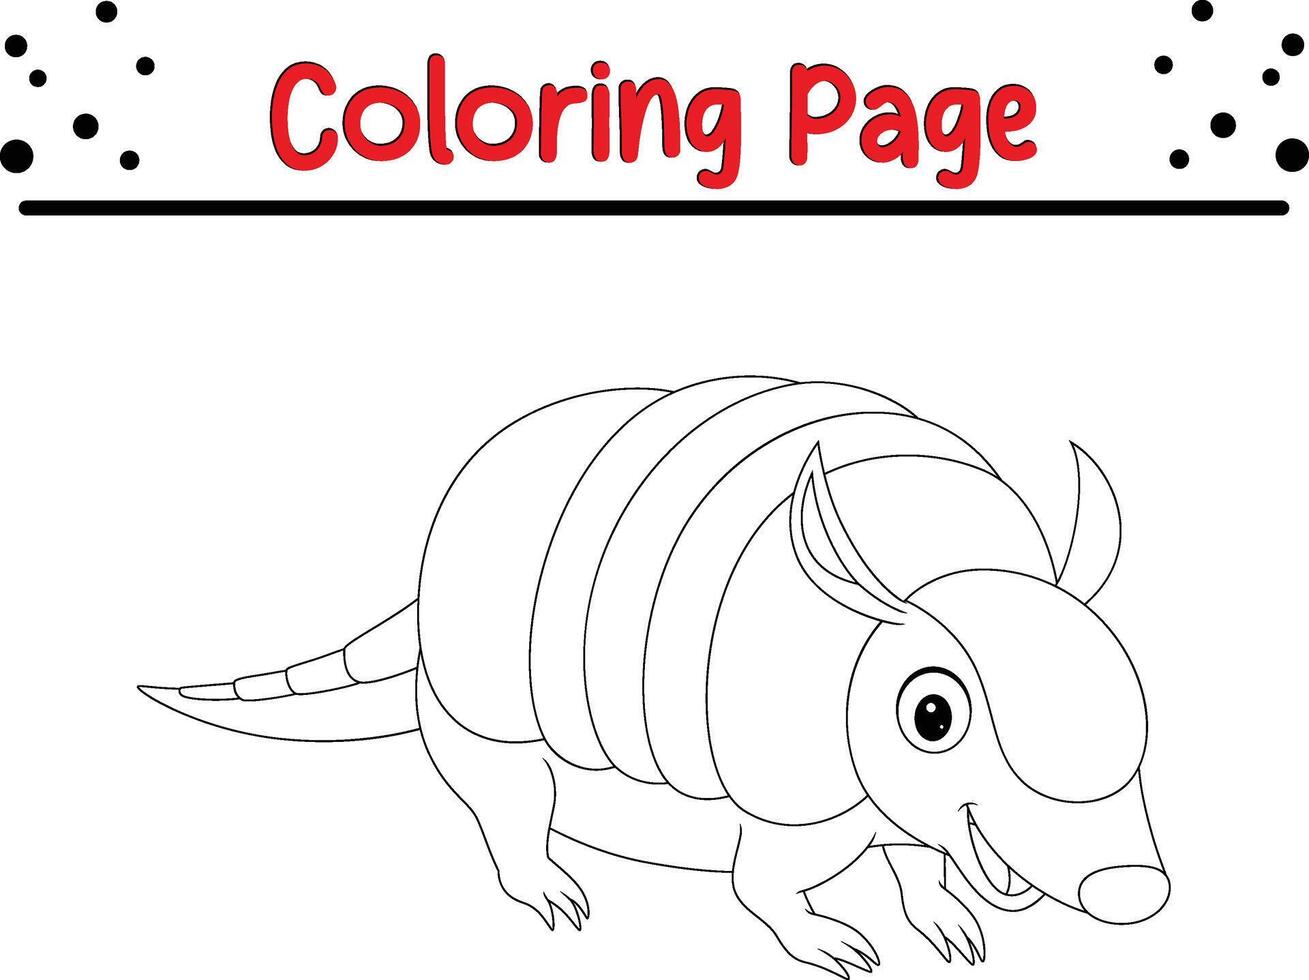 Cute armadillo coloring page for kids. Animal coloring book vector